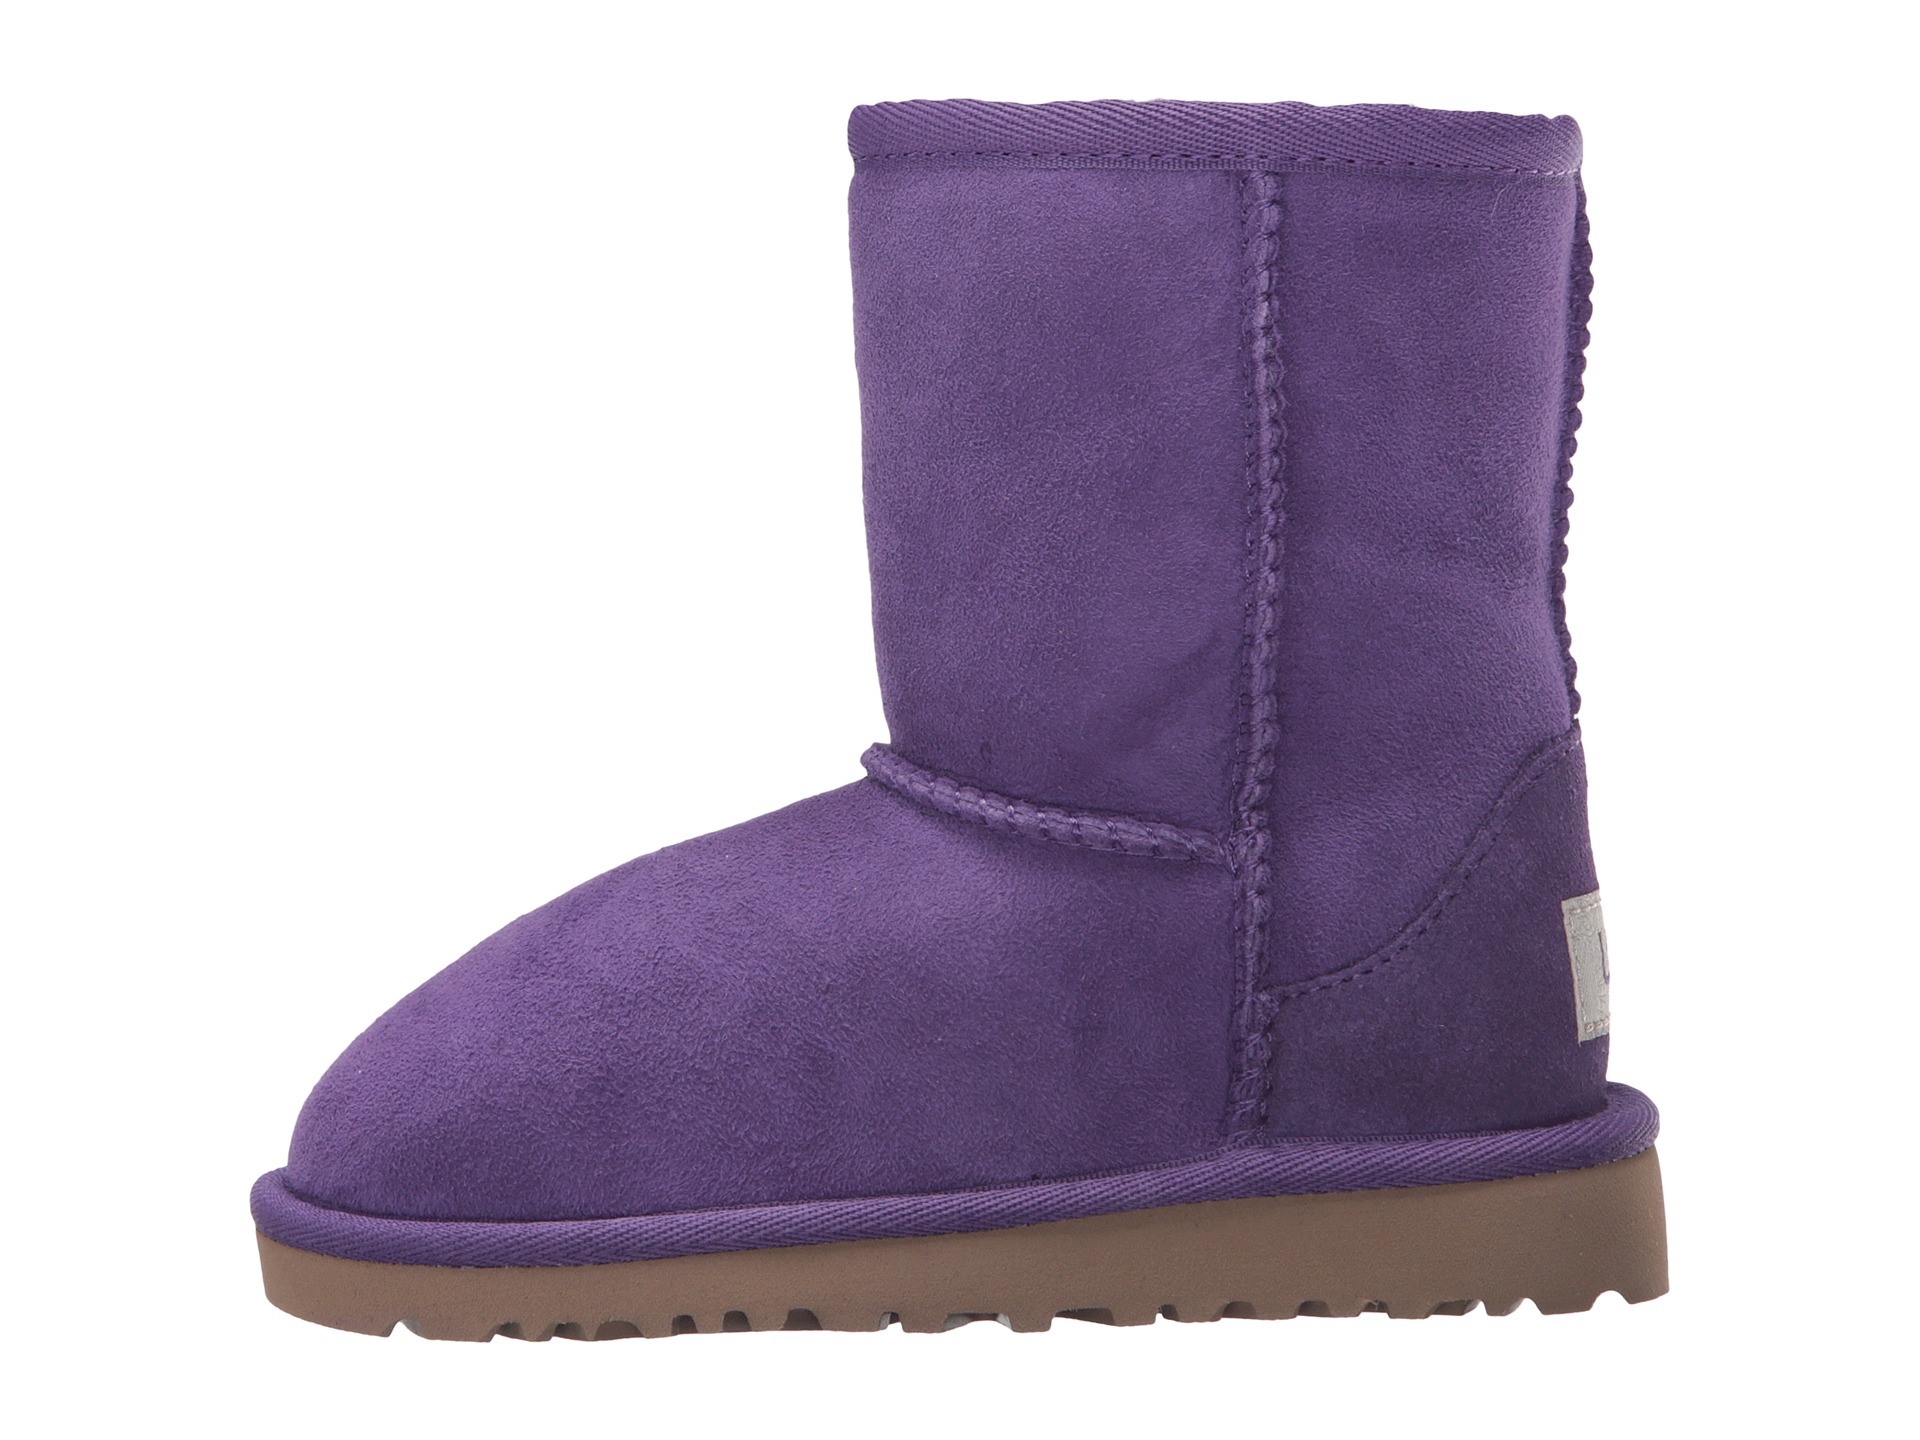 UGG Kids Classic (Toddler/Little Kid) Electric Purple - Zappos.com Free ...